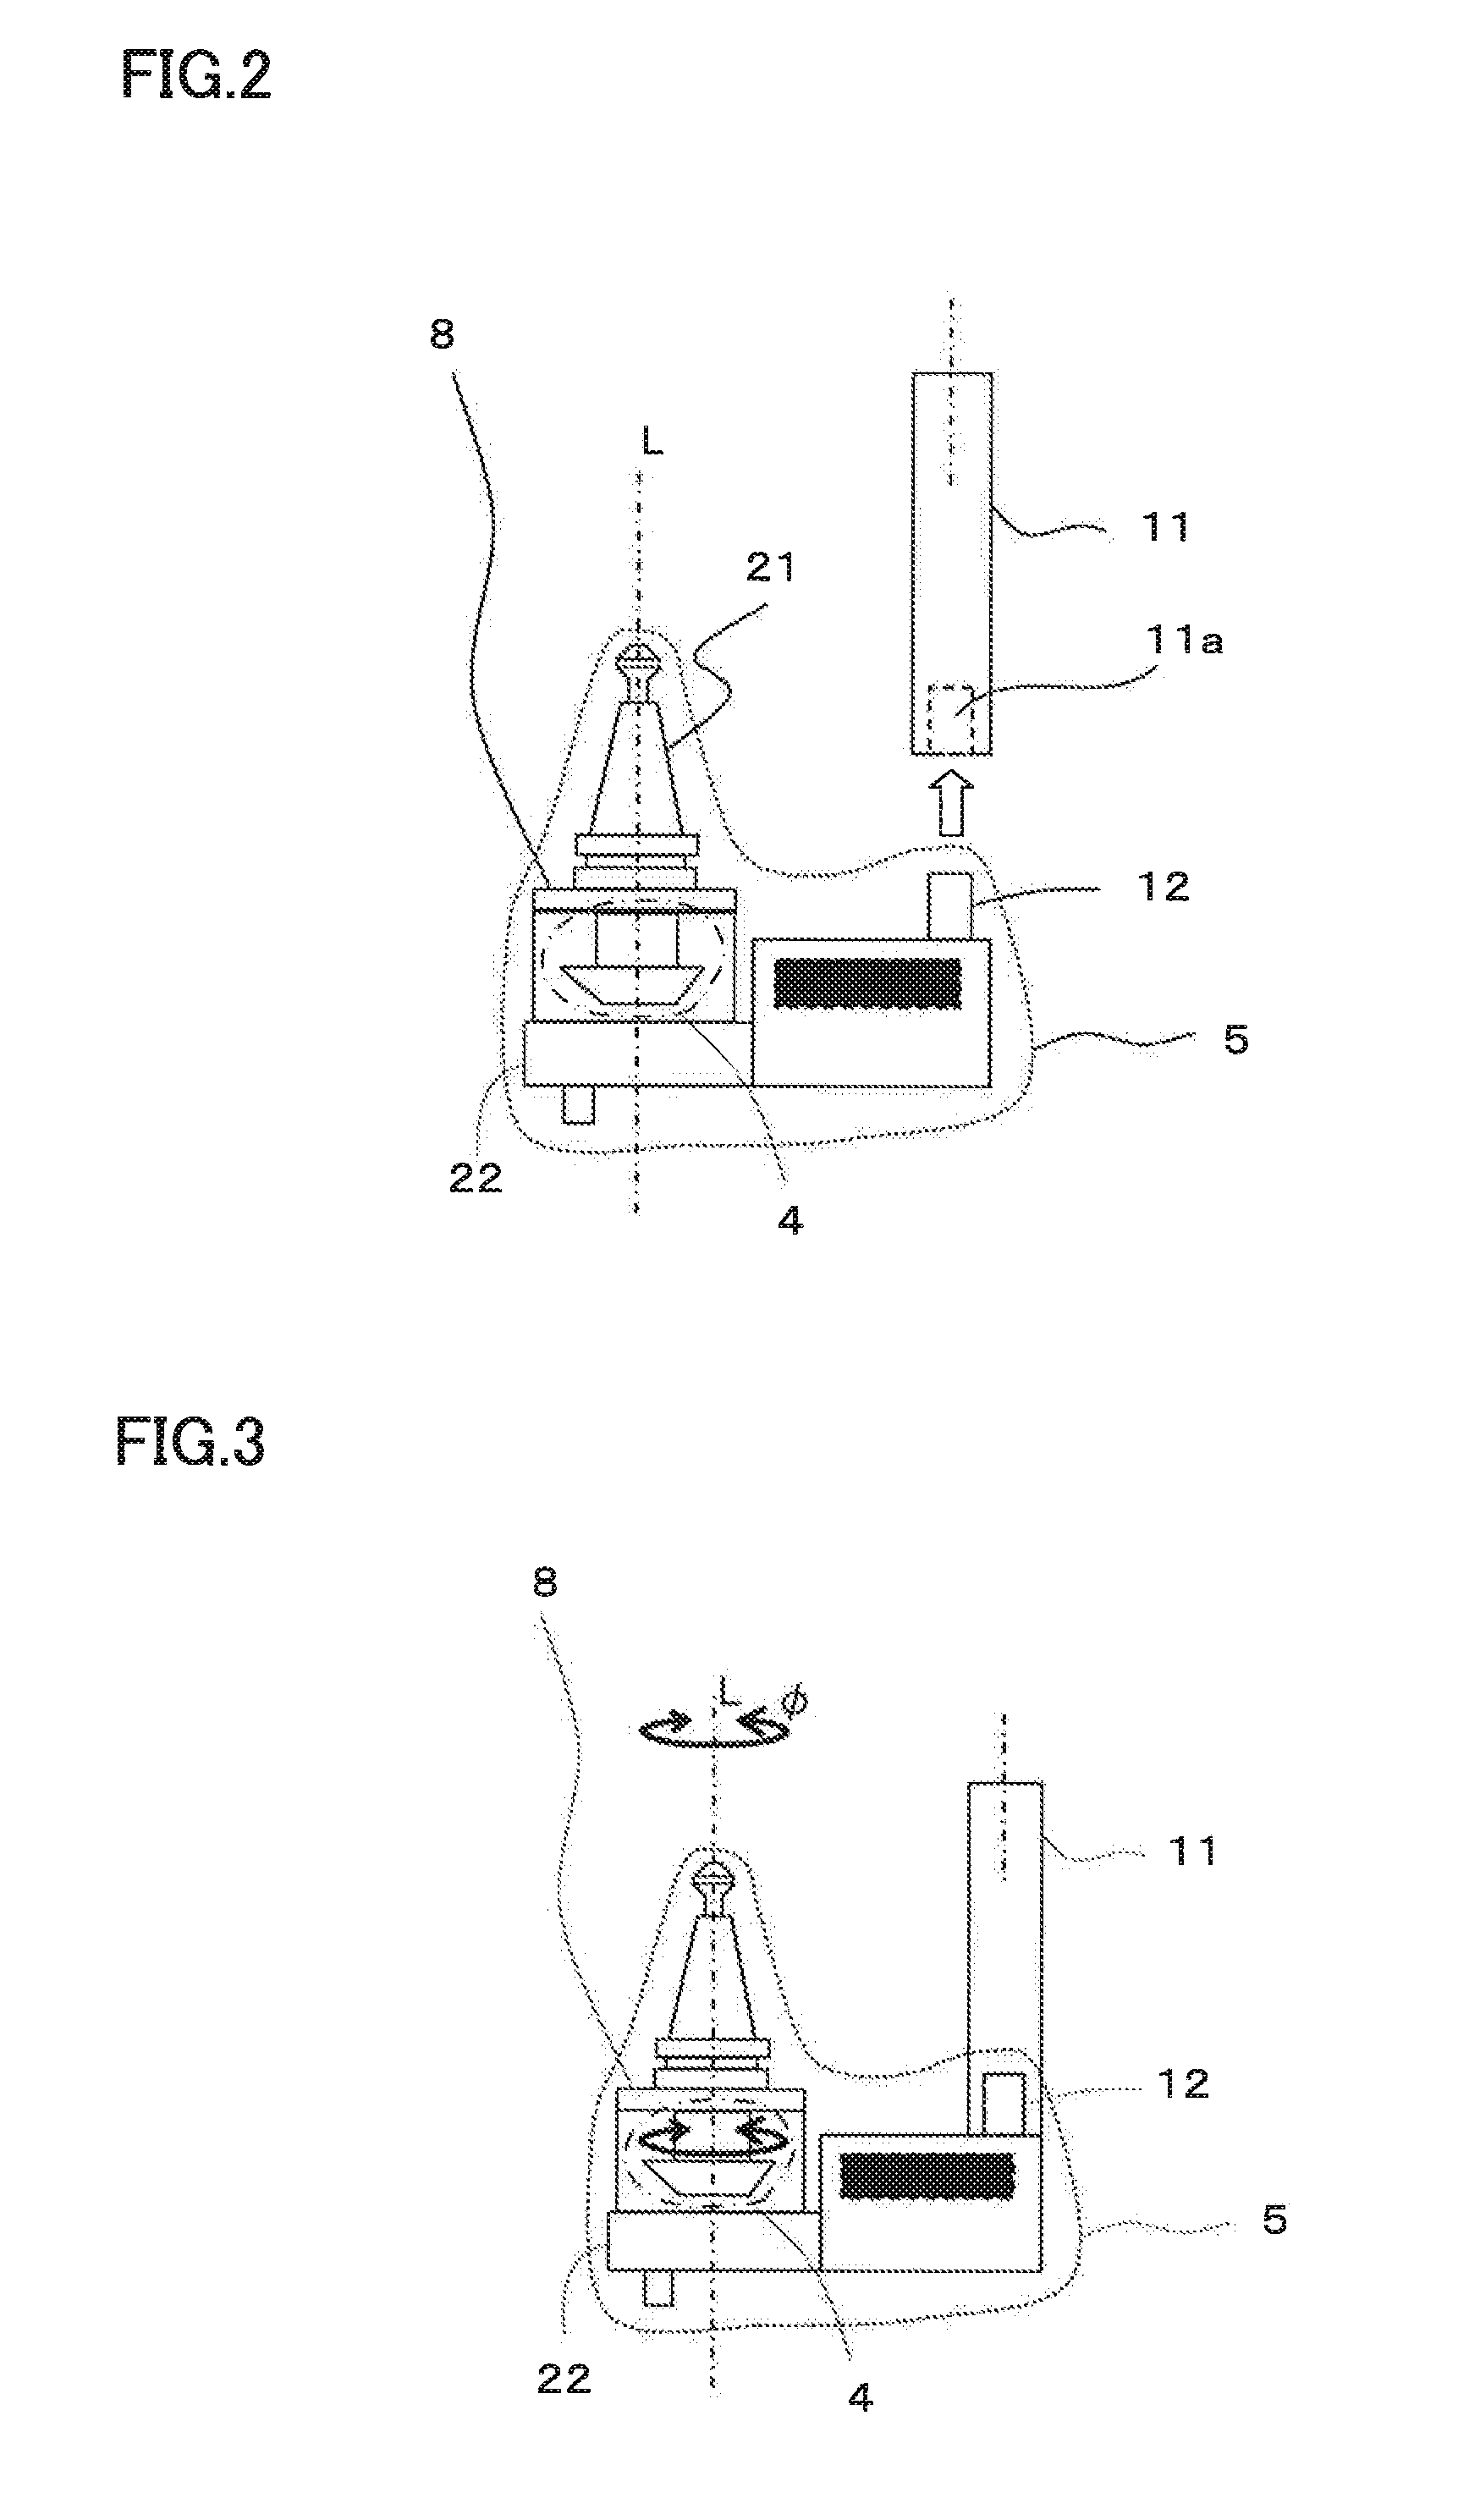 Distance measurement holder and machine tool having interfering object sensing function